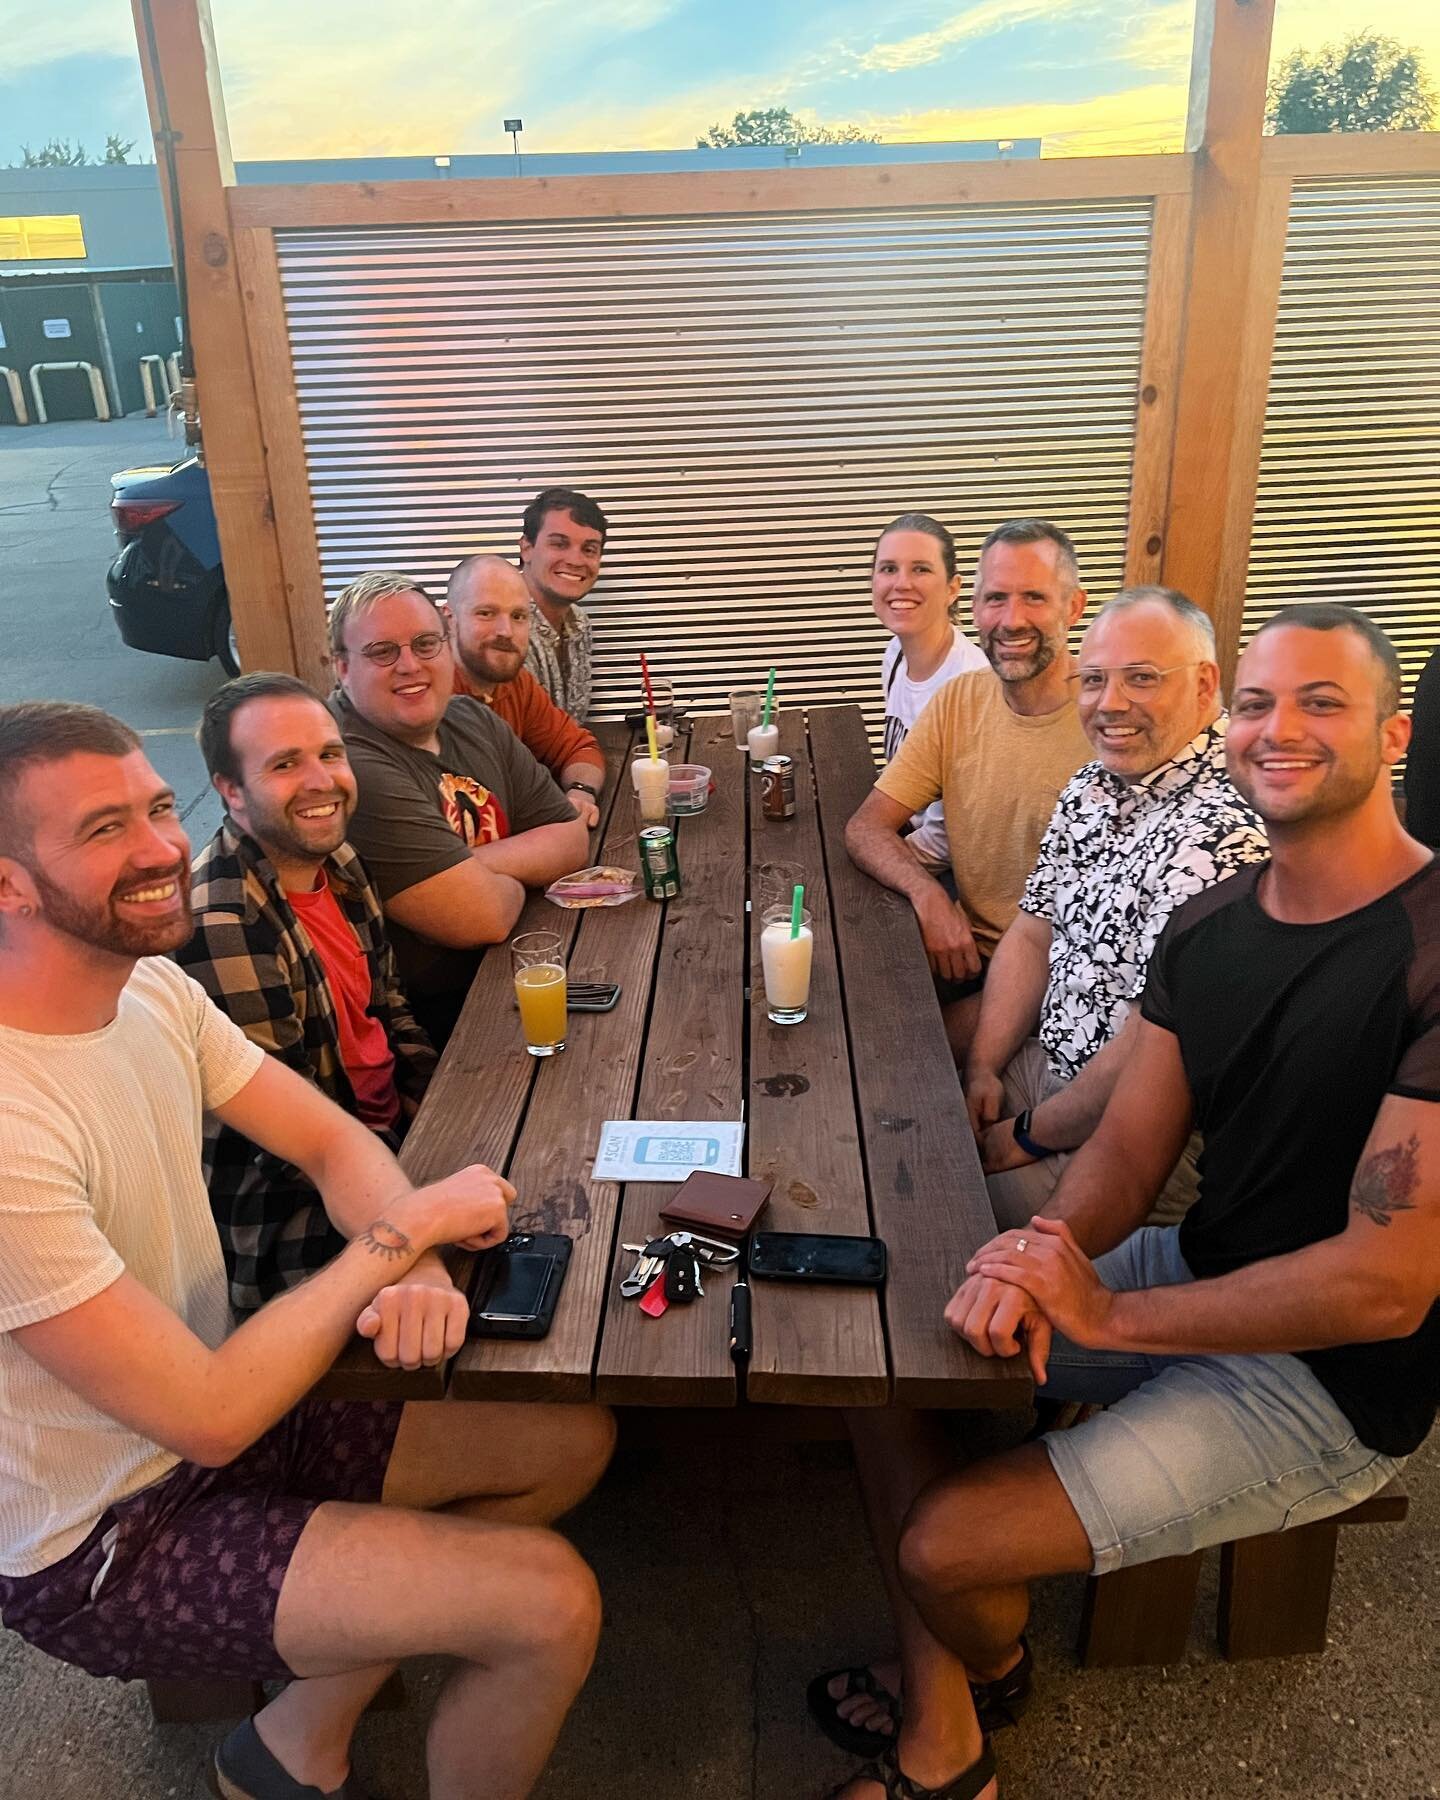 A little post-practice social with the team ☺️ Where is summer going?!
.
.
.
 #mniceswimclub #mastersswimming #usms #igla #minnesotamastersswimming #swimming #gayswimteam #queerswimming #lgbtq